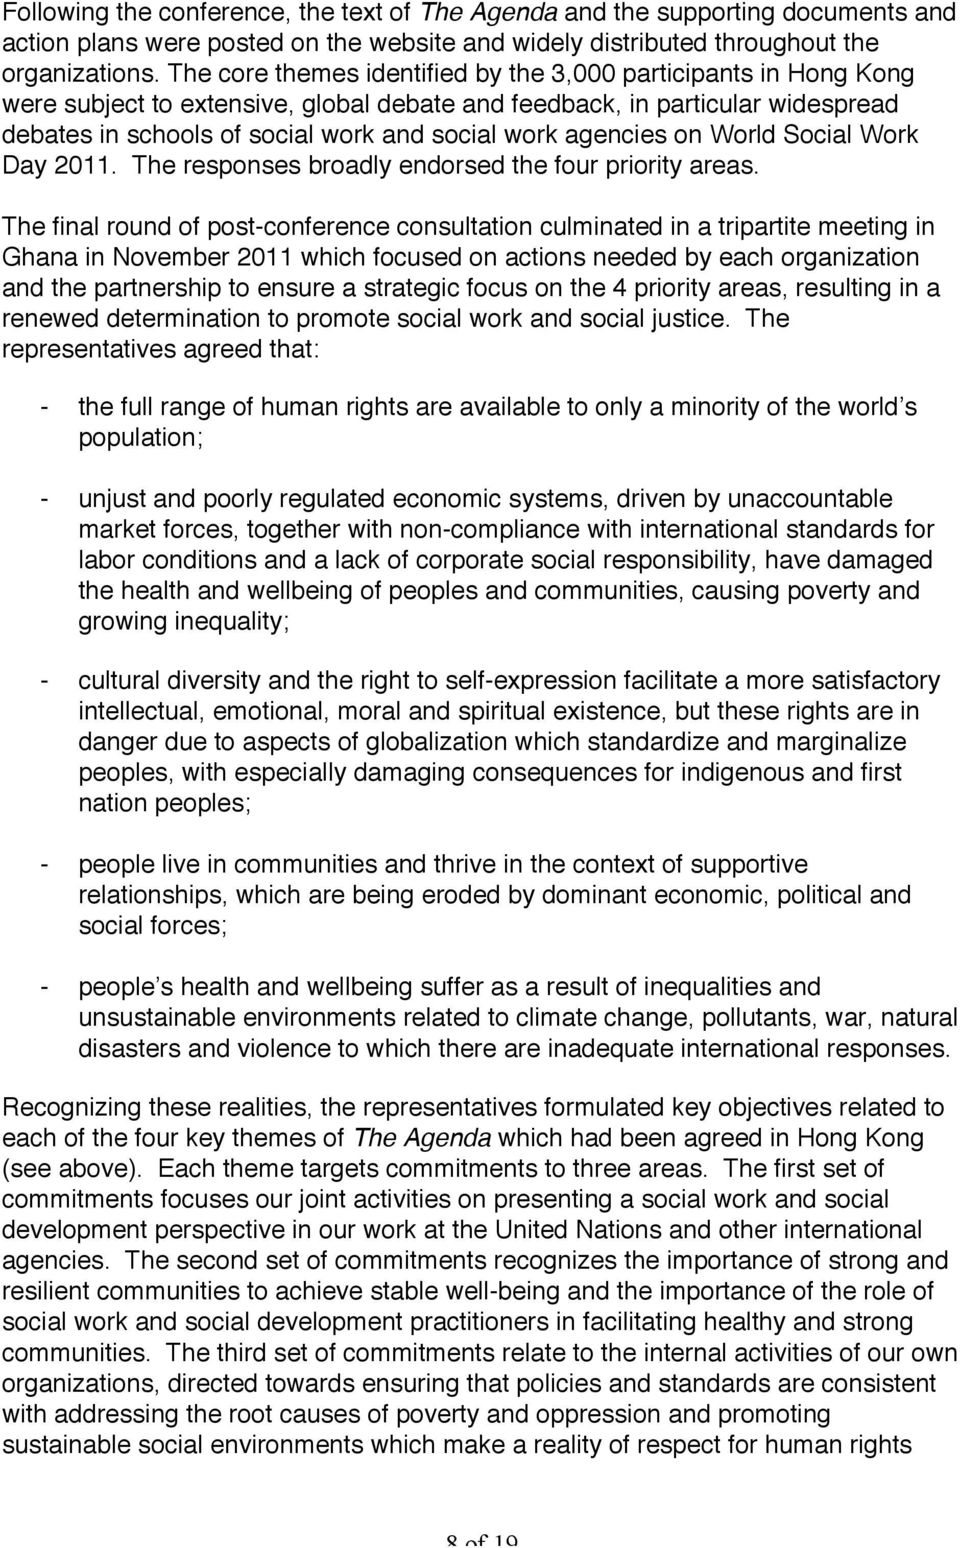 agencies on World Social Work Day 2011. The responses broadly endorsed the four priority areas.